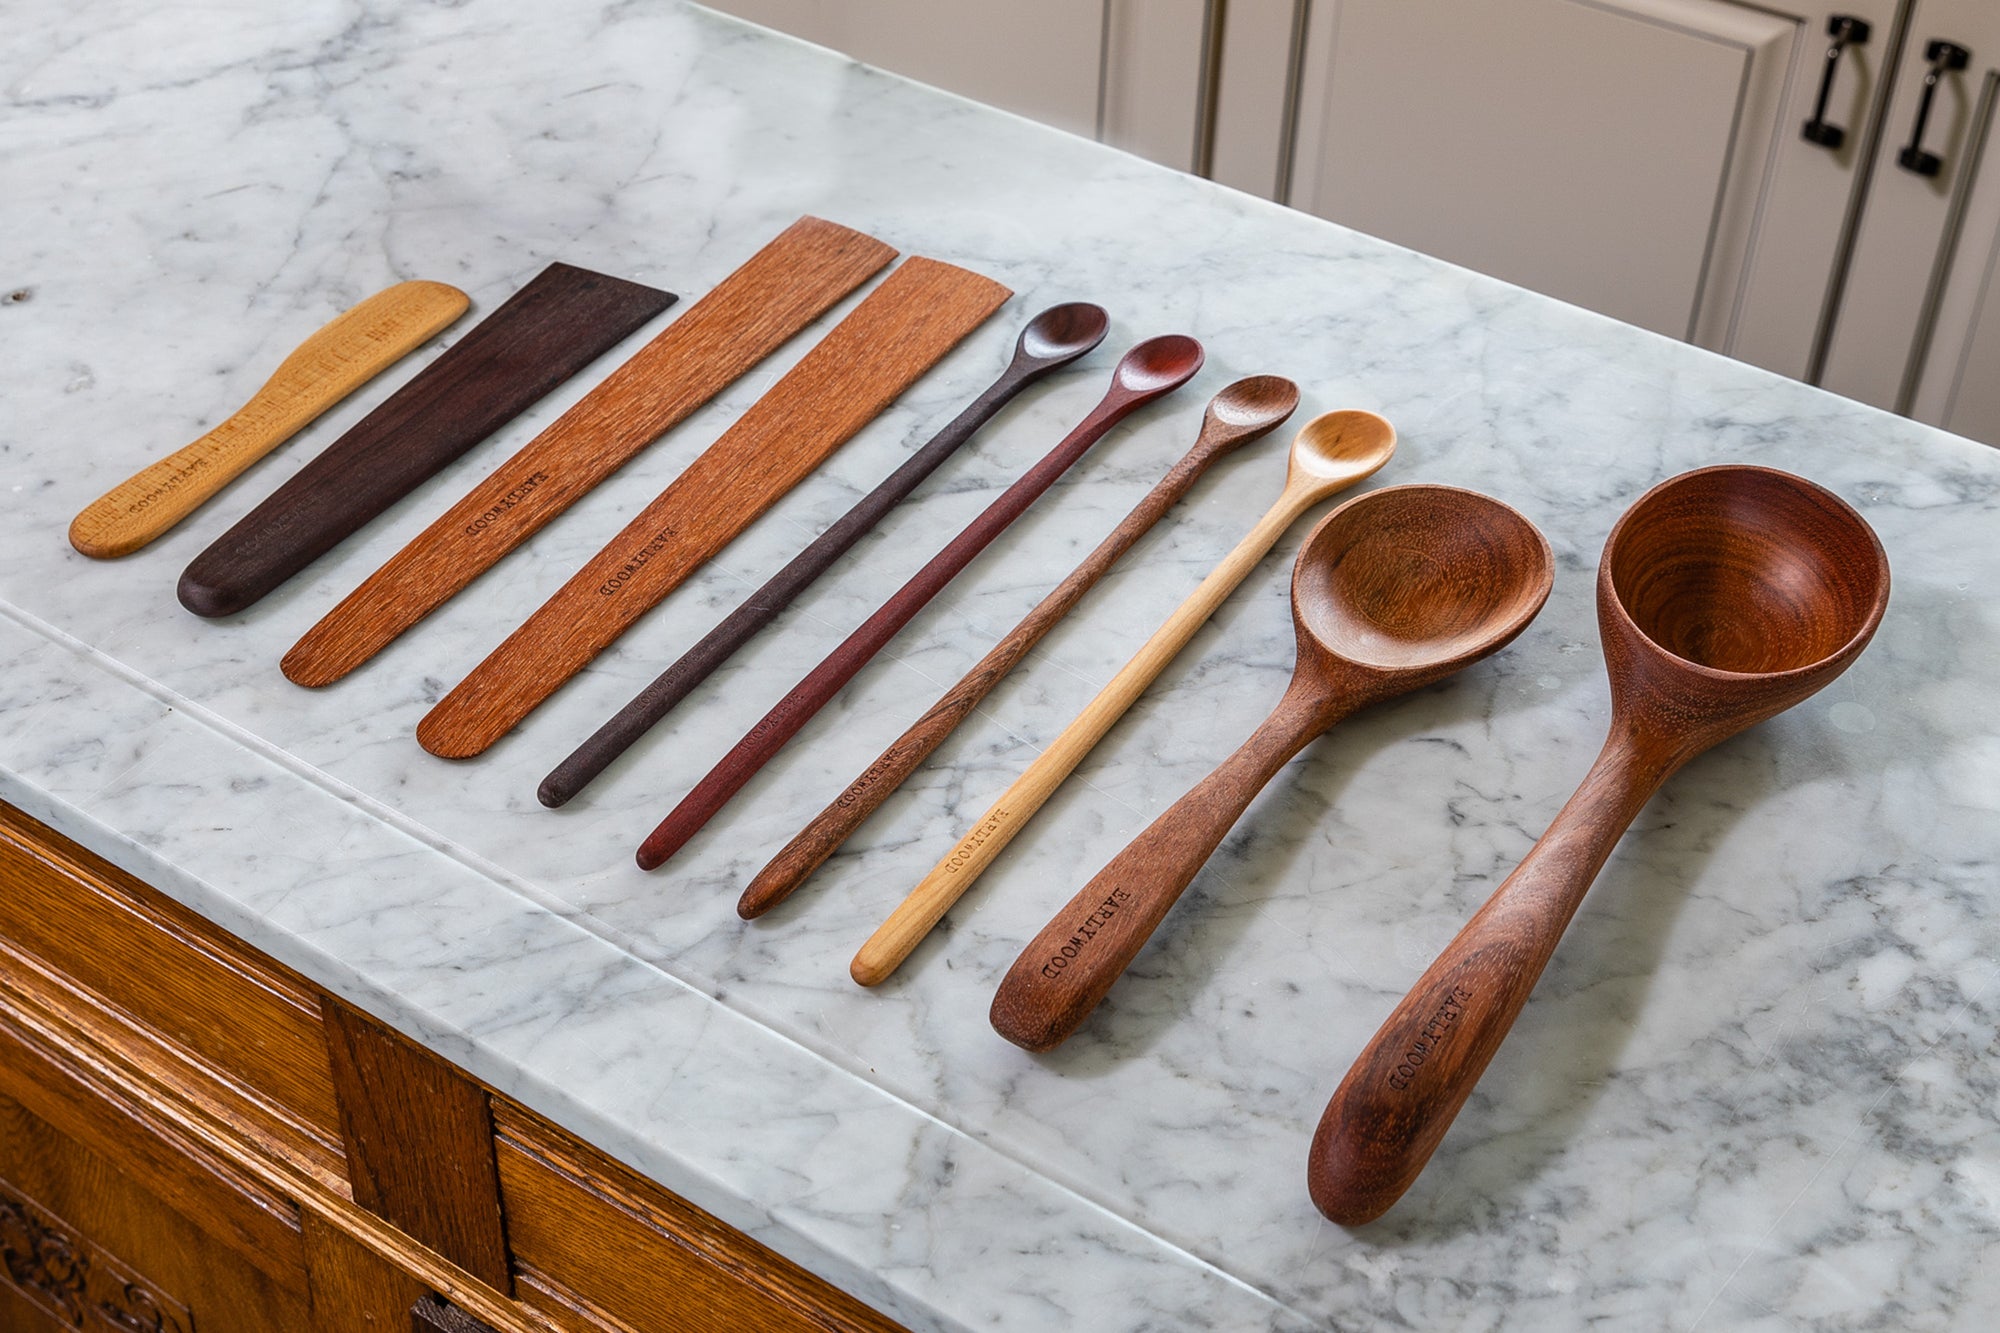 Kitchen tools and utensils made from wood